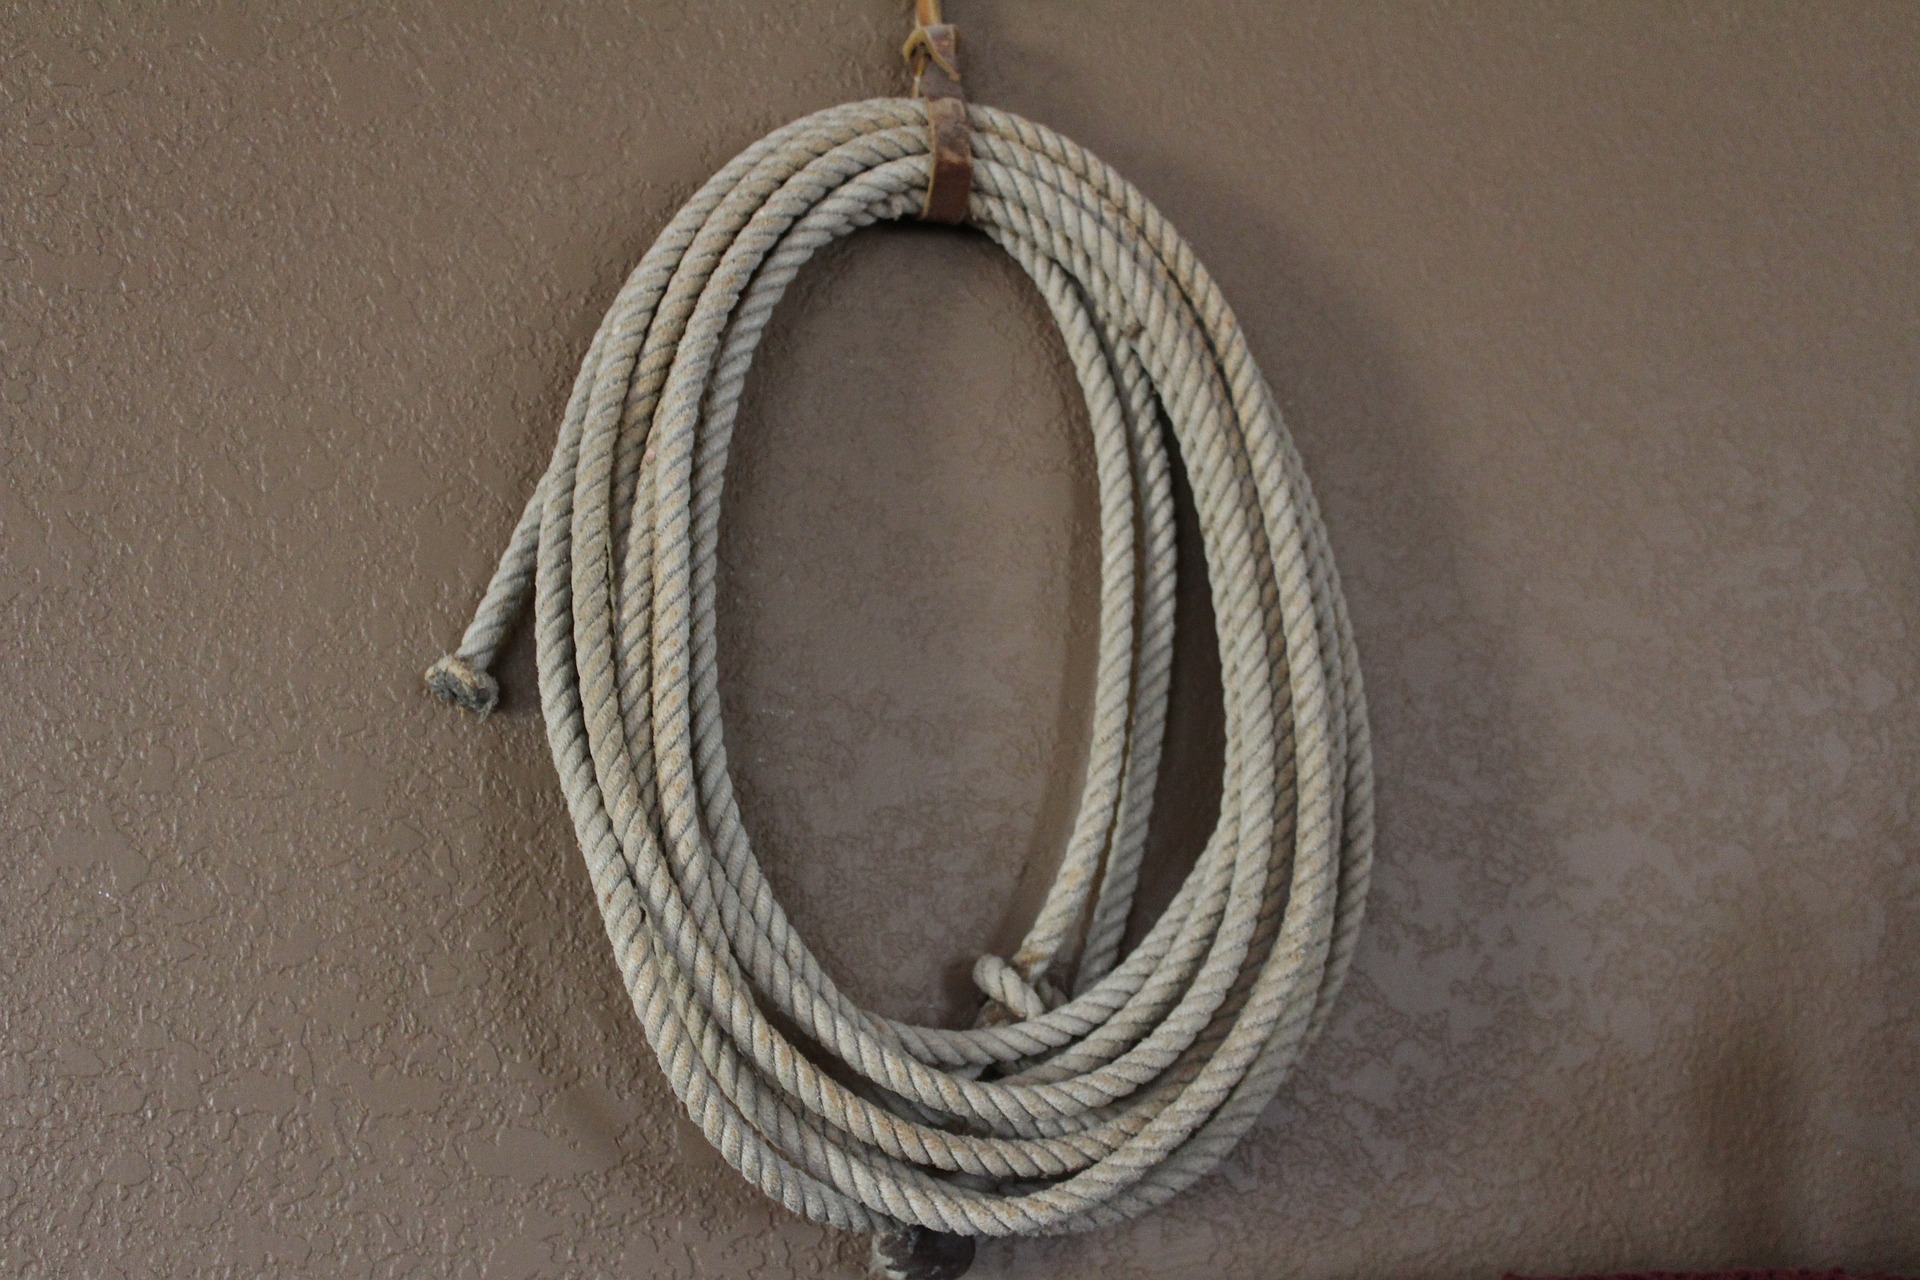 choosing a lasso rope for a beginner